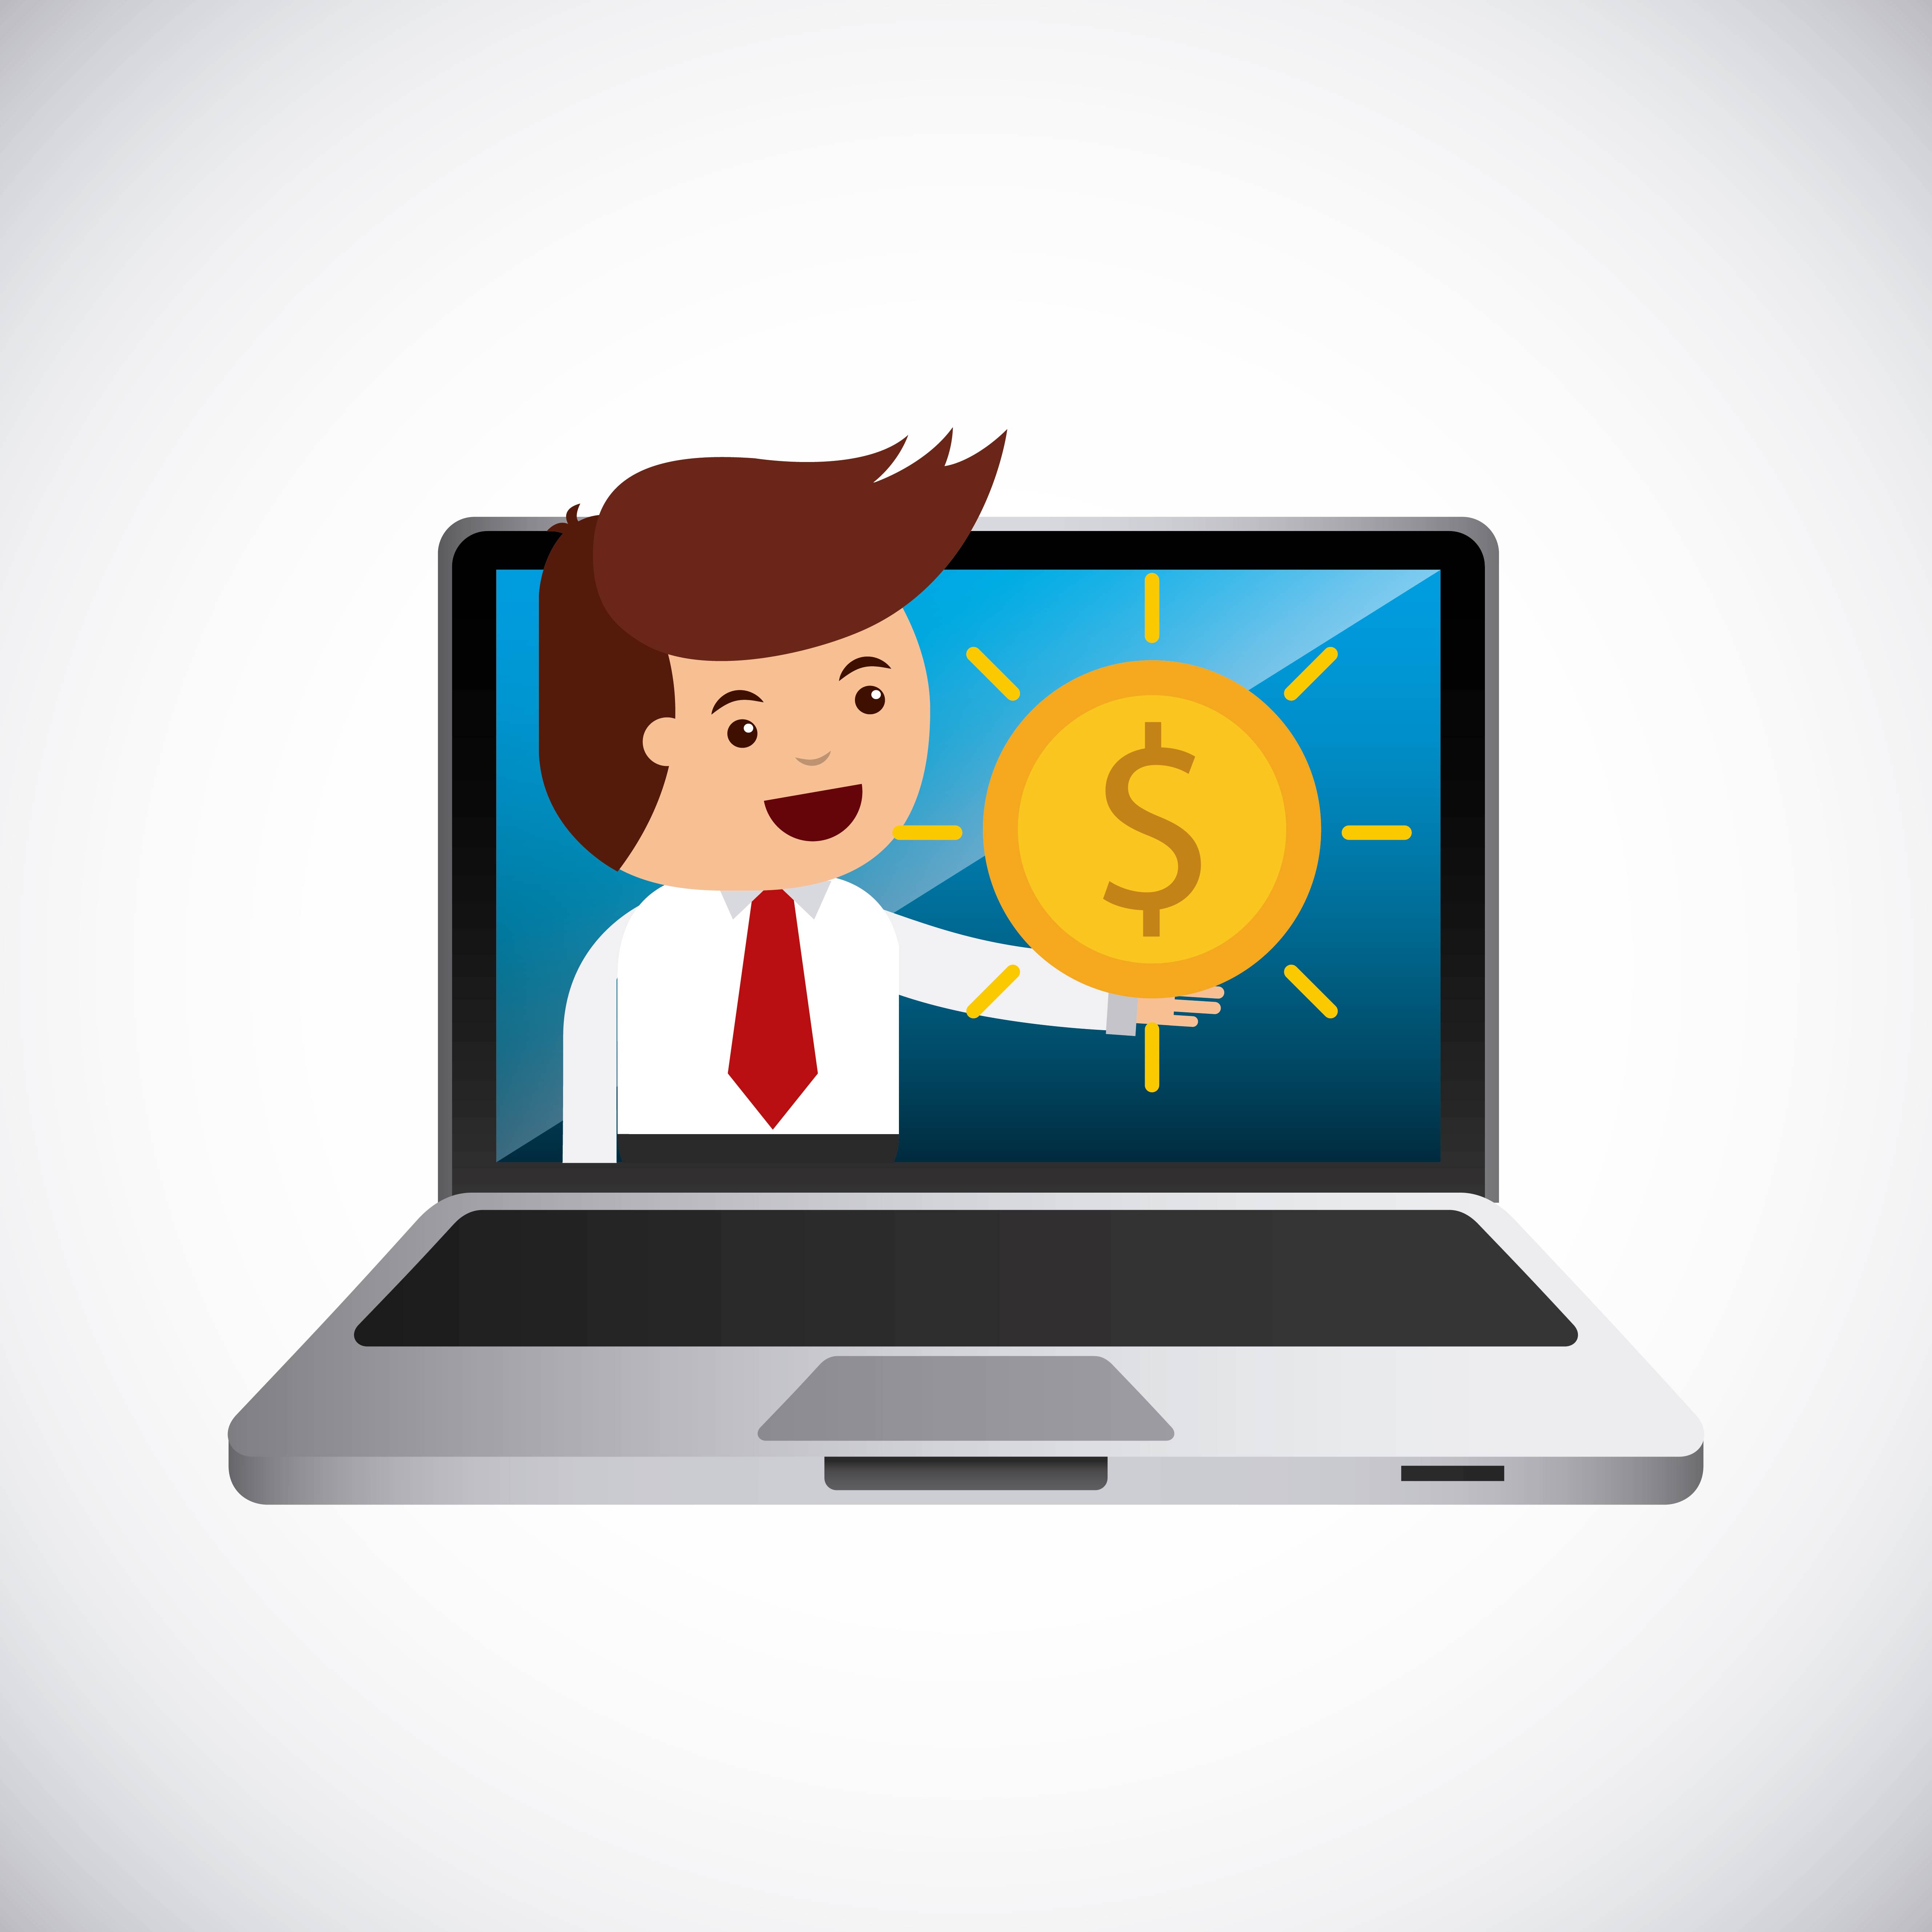 Drawing of a business man inside the screen of a laptop with a coin on his hand - represents that To revert low sef-worth you need change the way you look at yourself